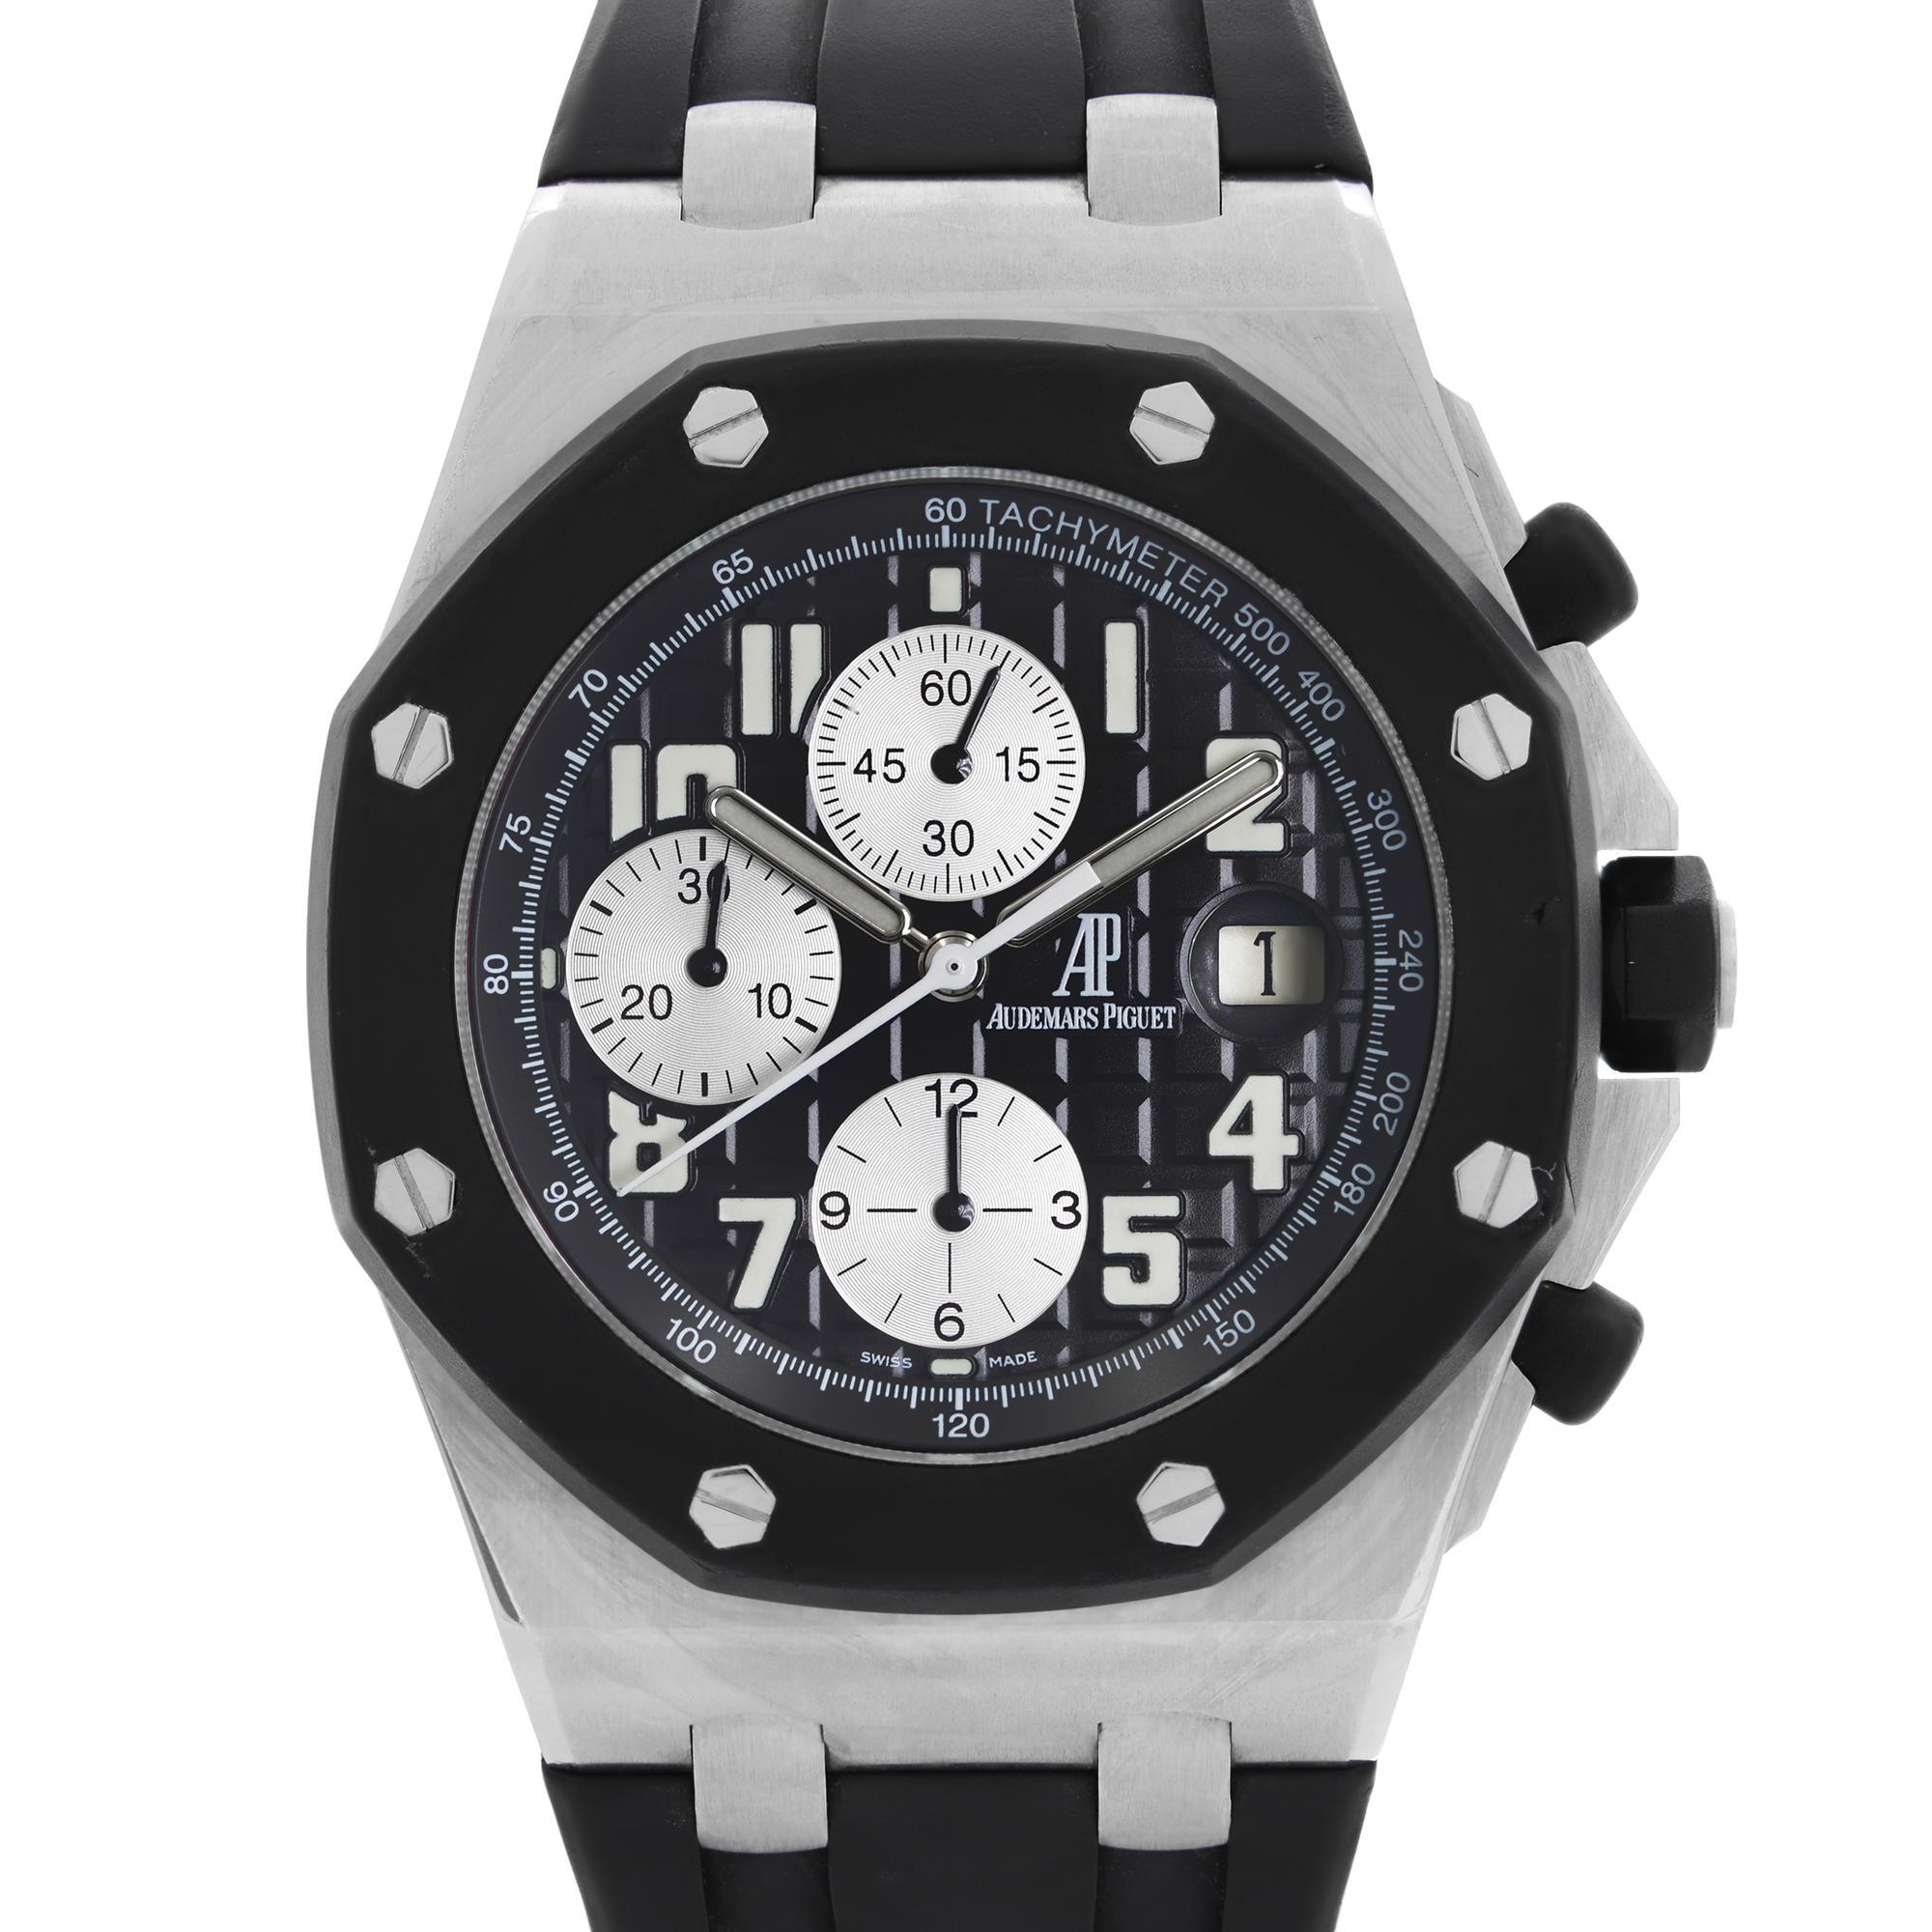 2008 Dated. Pre-Owned Audemars Piguet Royal Oak Offshore Steel Automatic Watch 25940SK.OO.D002CA.01.A. Minor Dings on the Bezel Under Closer Inspection. This Beautiful Mens Timepiece Is Powered by a Mechanical (Automatic) Movement and Features: